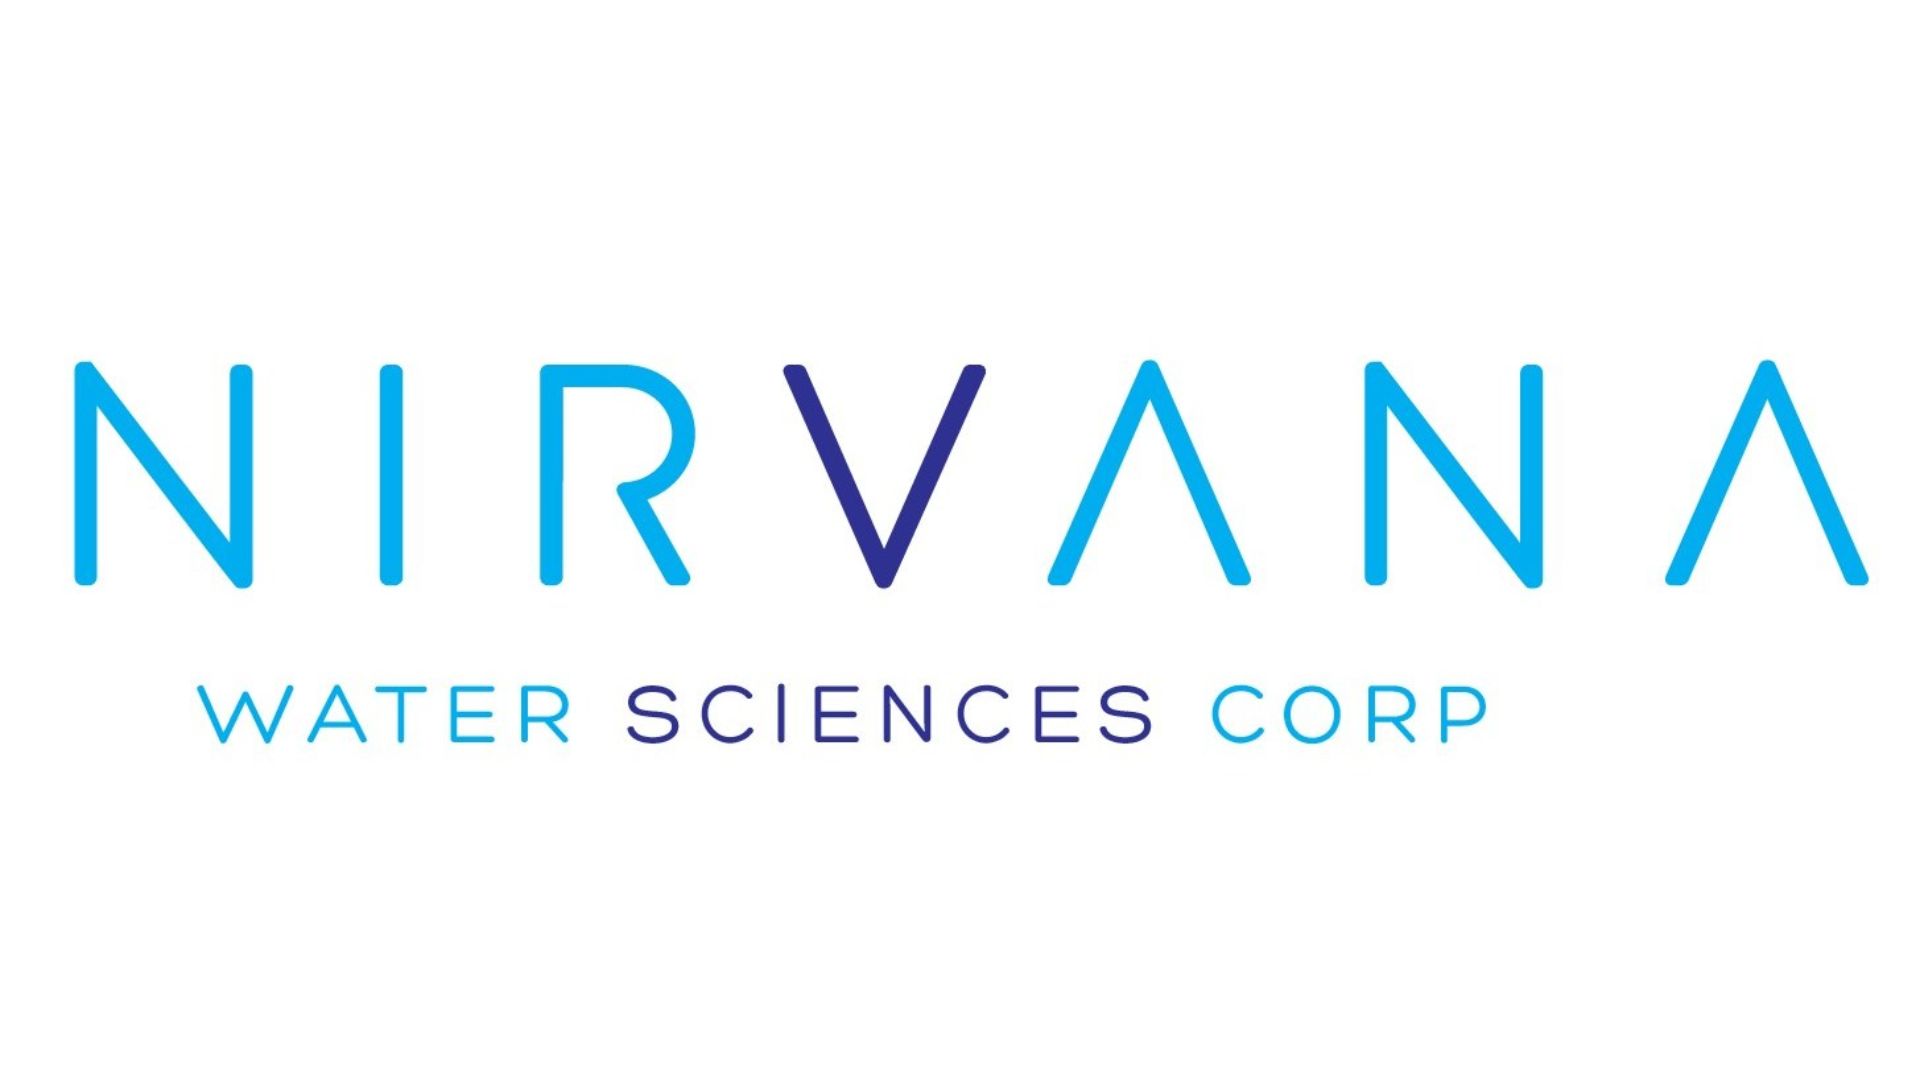 Stephen Curry Becomes Investor & Brand Ambassador of Nirvana Water Sciences Corp.